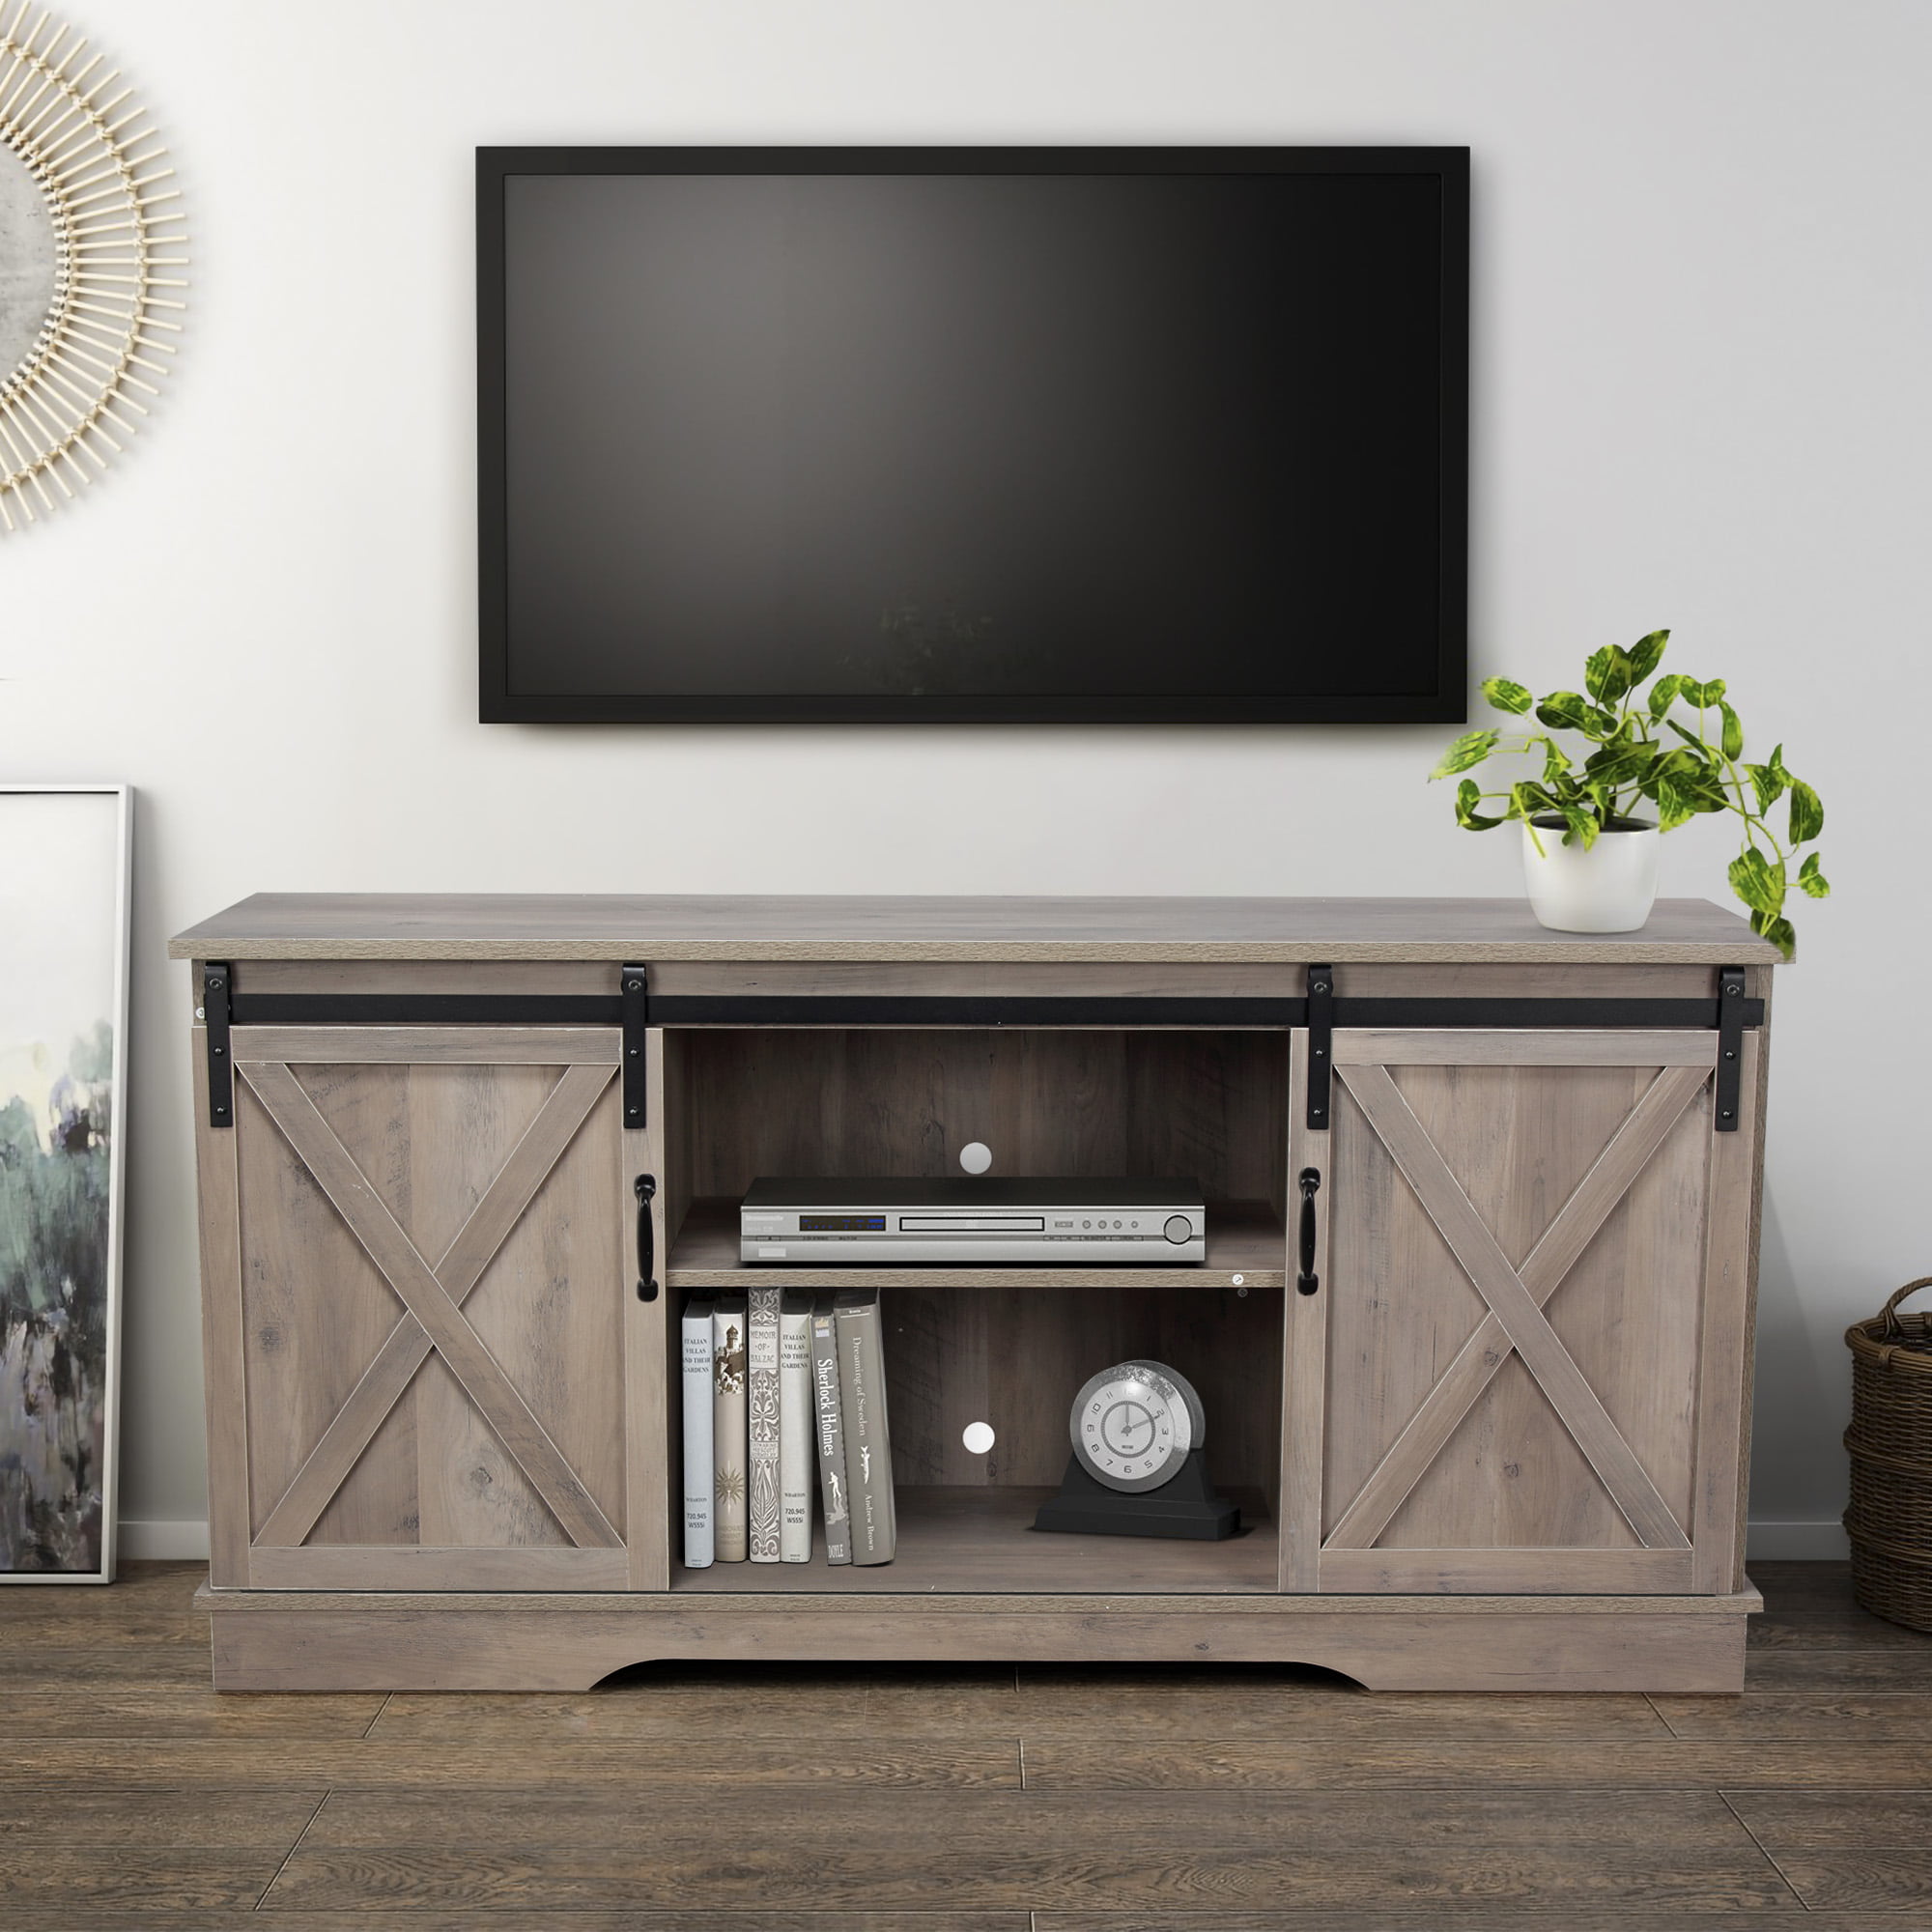 BELLEZE Modern Farmhouse Style 58 Inch TV Stand With ...